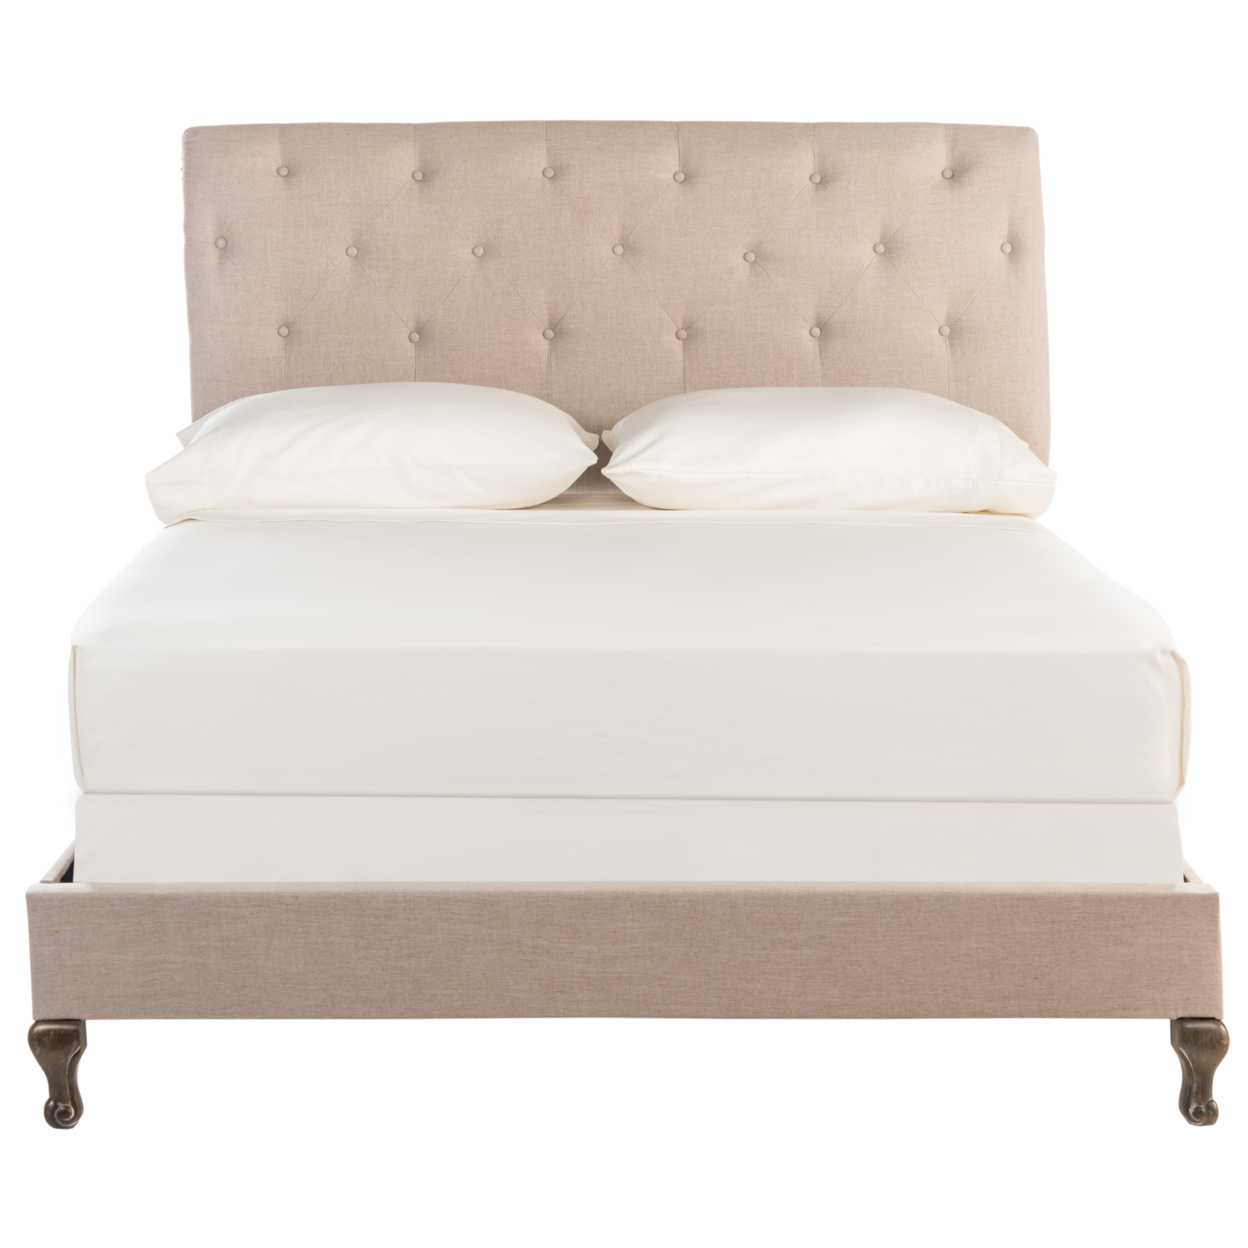 SAFAVIEH Hathaway Bed Taupe Twin